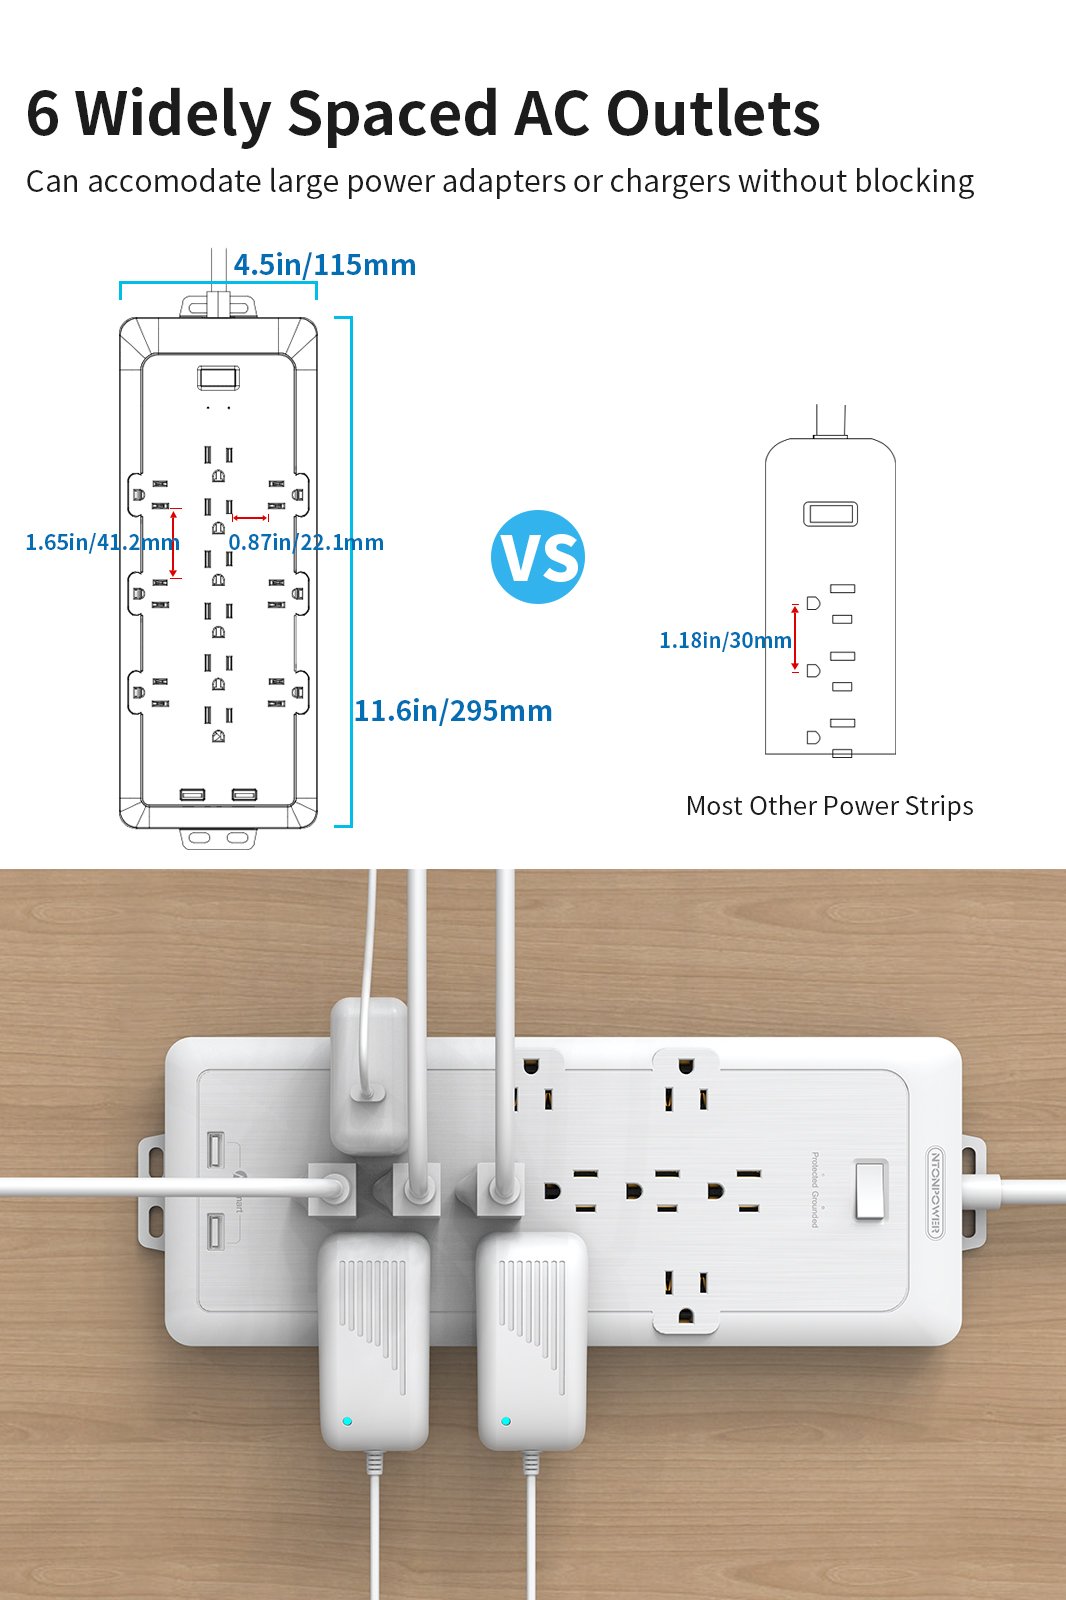 Ntonpower SurgePro  12 Outlets 2 USB 4000 Joules